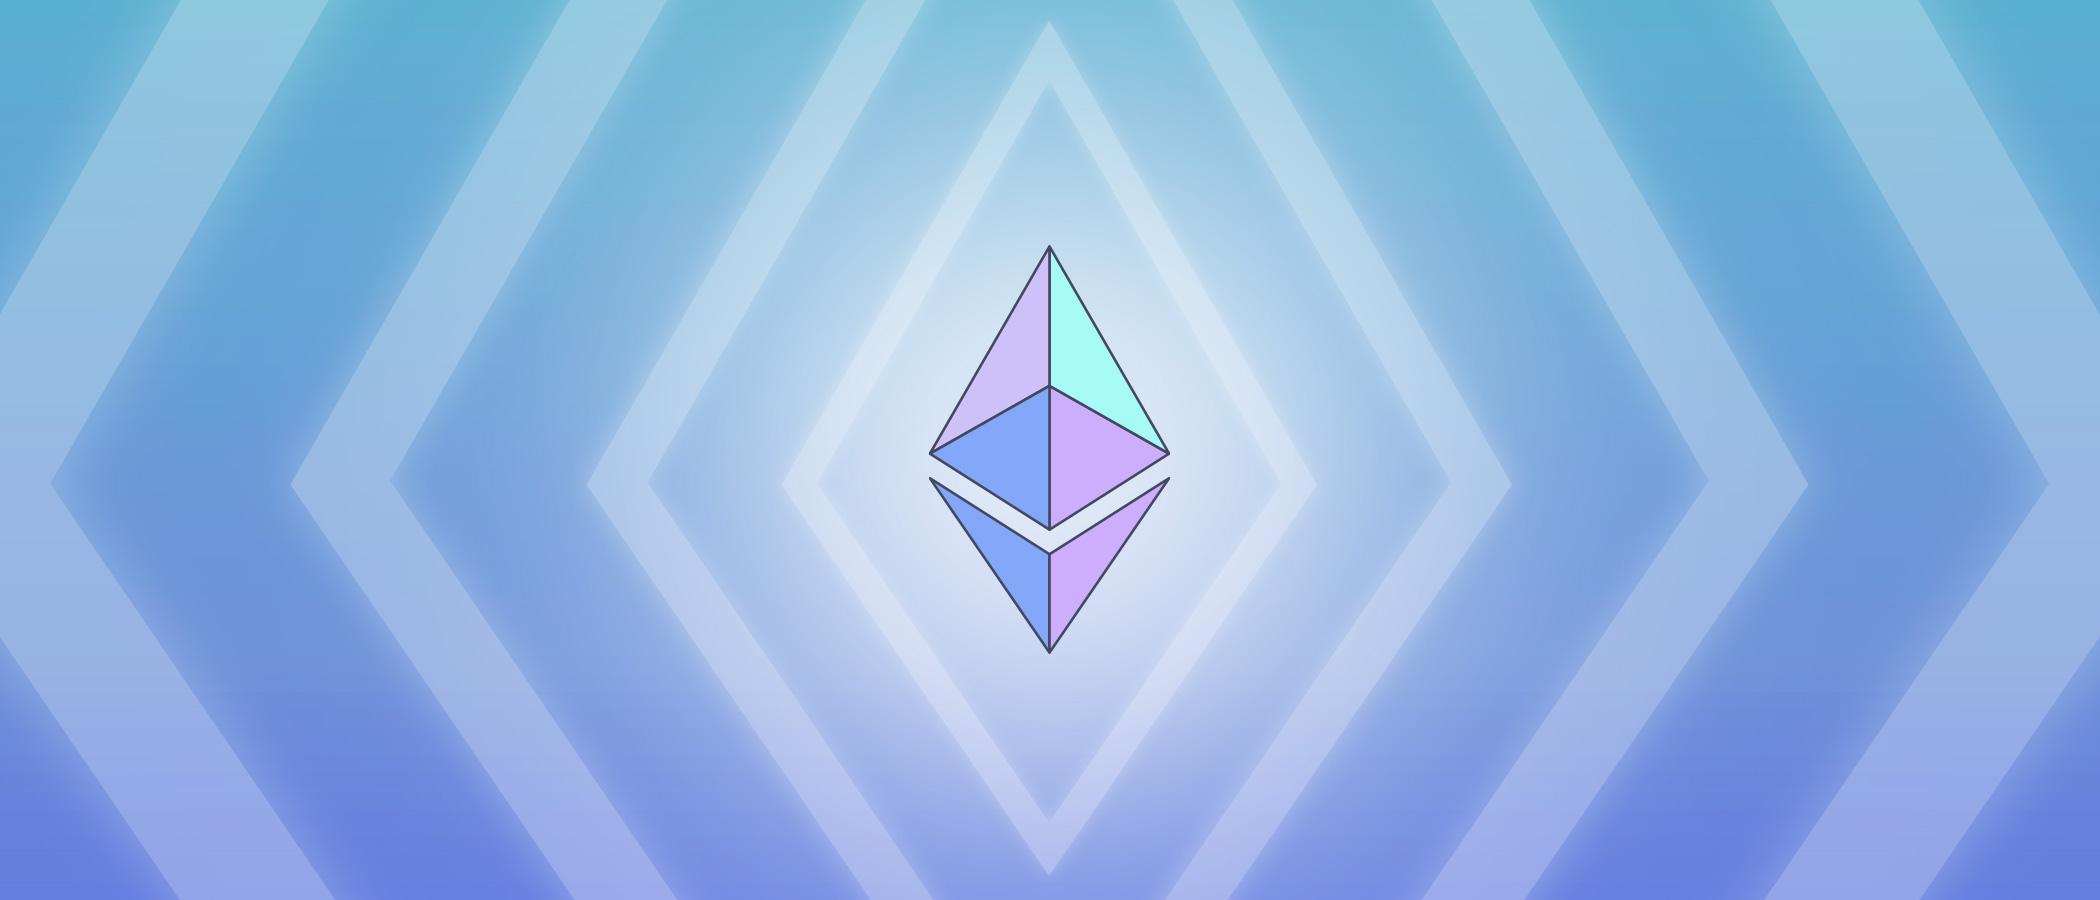 the ethereum project: learning to dream with open minds